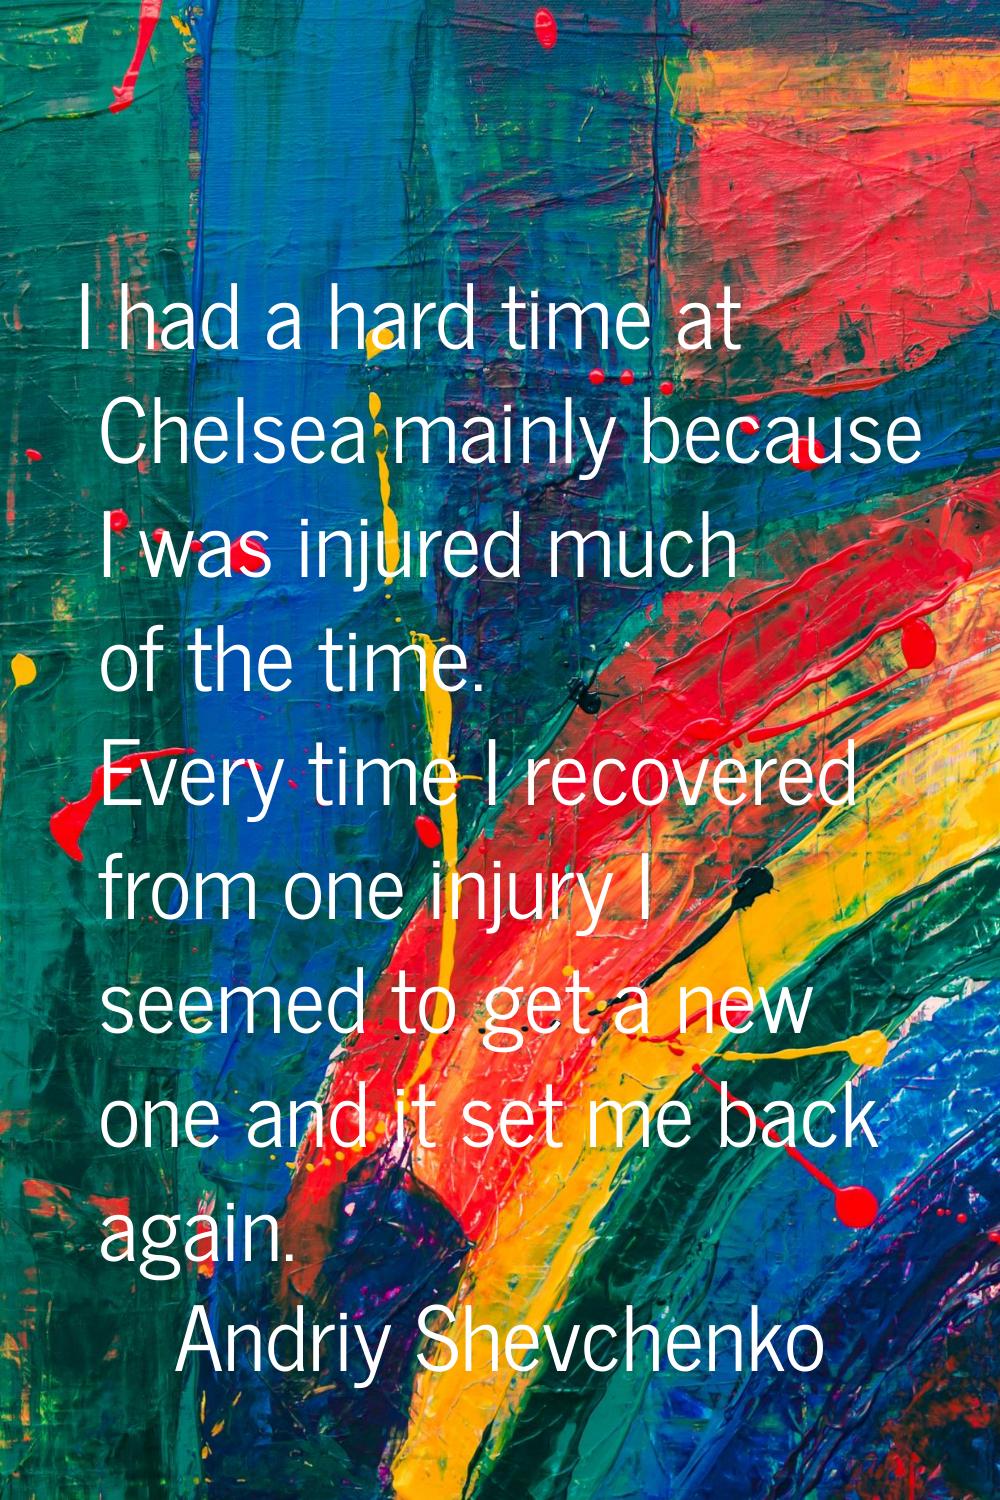 I had a hard time at Chelsea mainly because I was injured much of the time. Every time I recovered 